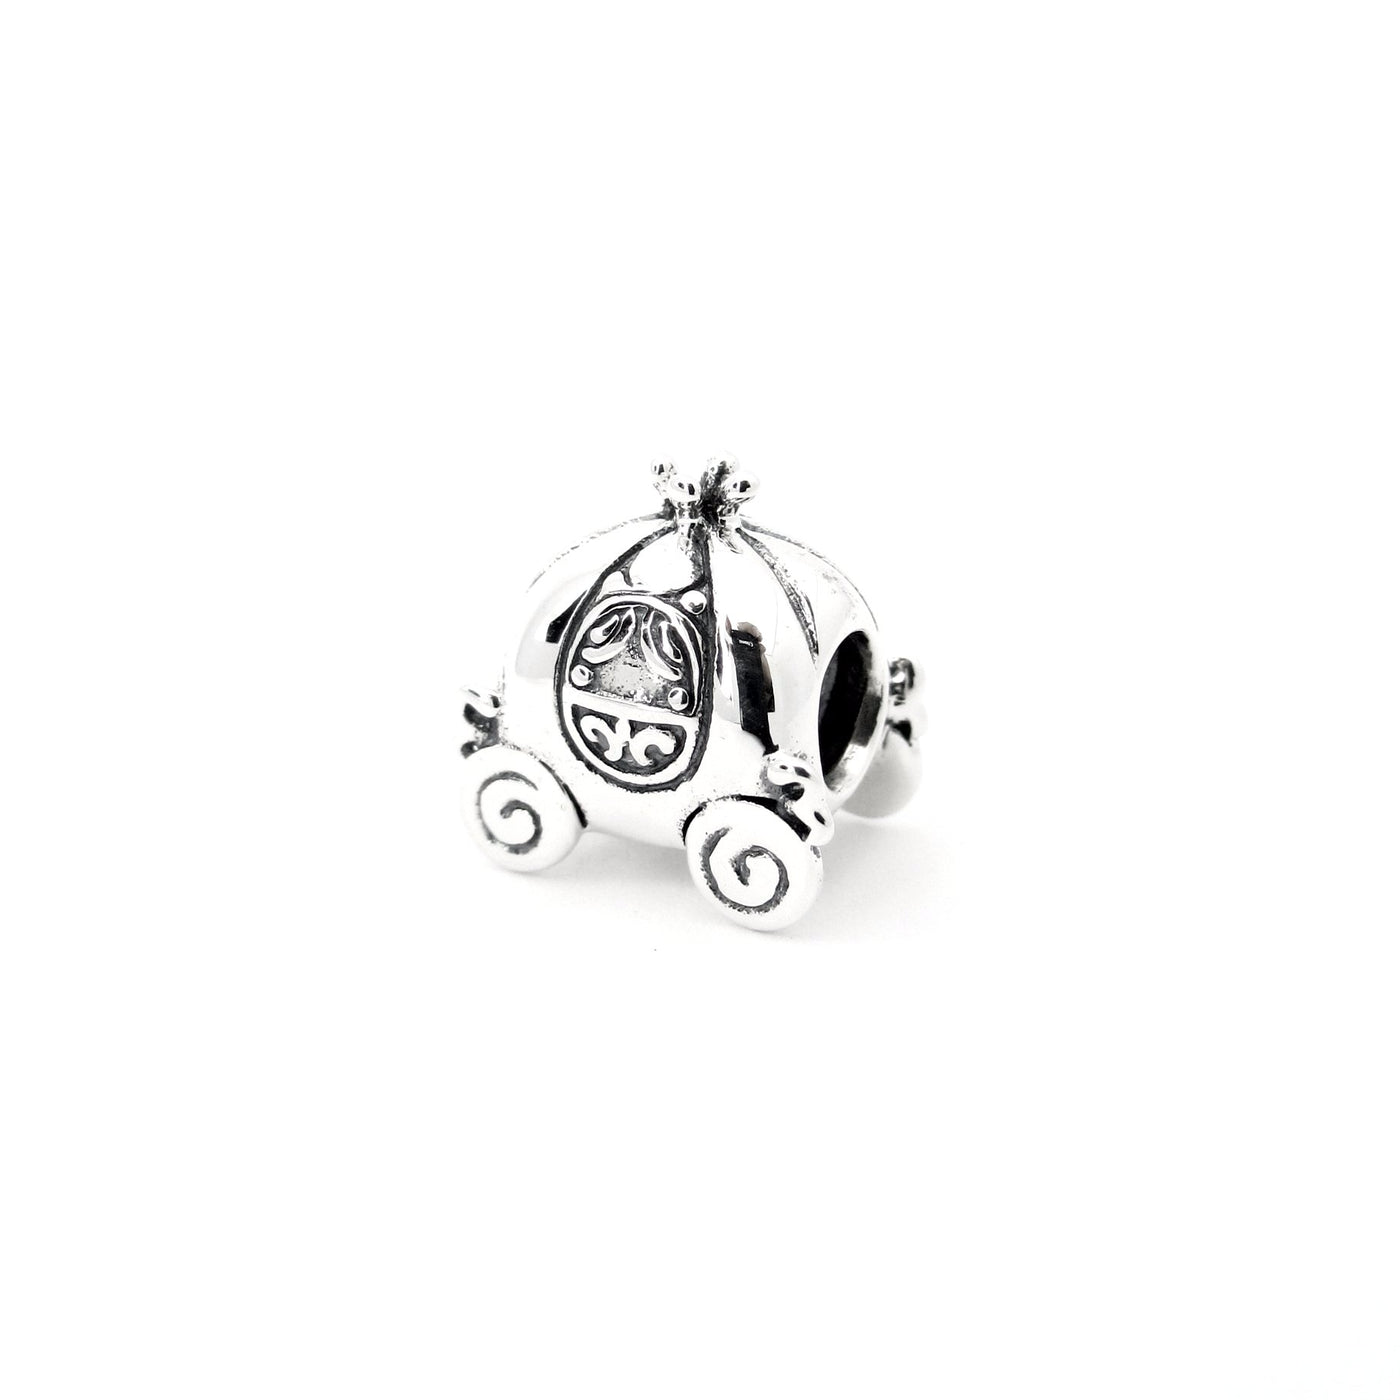 Storyland Carriage Couture Charm